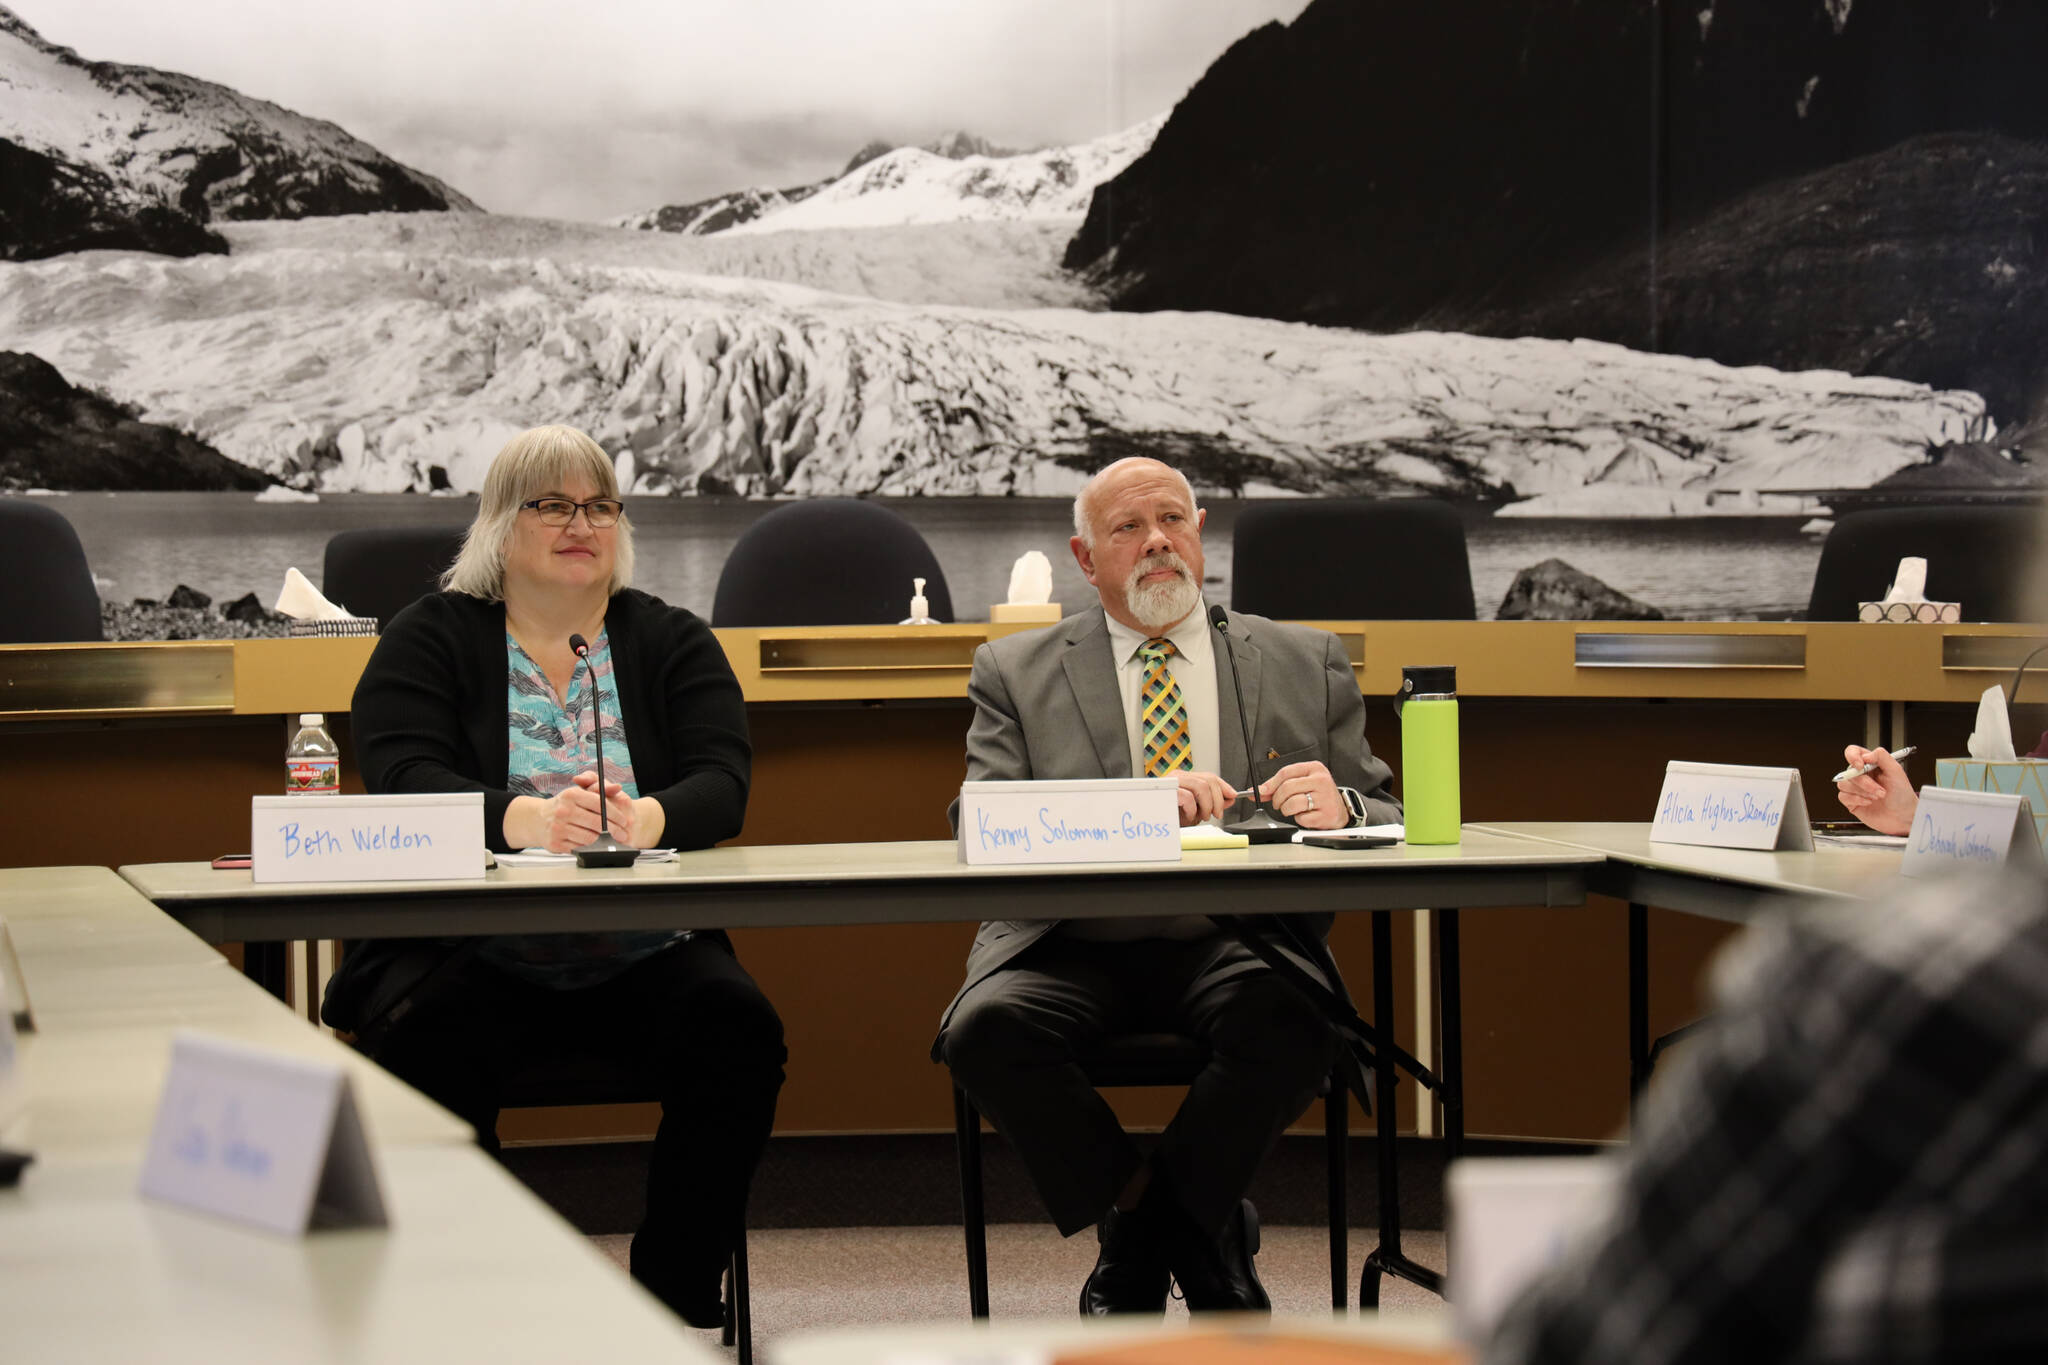 City and Borough of Juneau Mayor Beth Weldon and Bartlett Regional Hospital Board President Kenny Solomon-Gross sit next to each other during a joint meeting between the Assembly and hospital’s senior leadership team and board to discuss the hospital’s current multi-million dollar deficit and financial state. ( Clarise Larson / Juneau Empire)